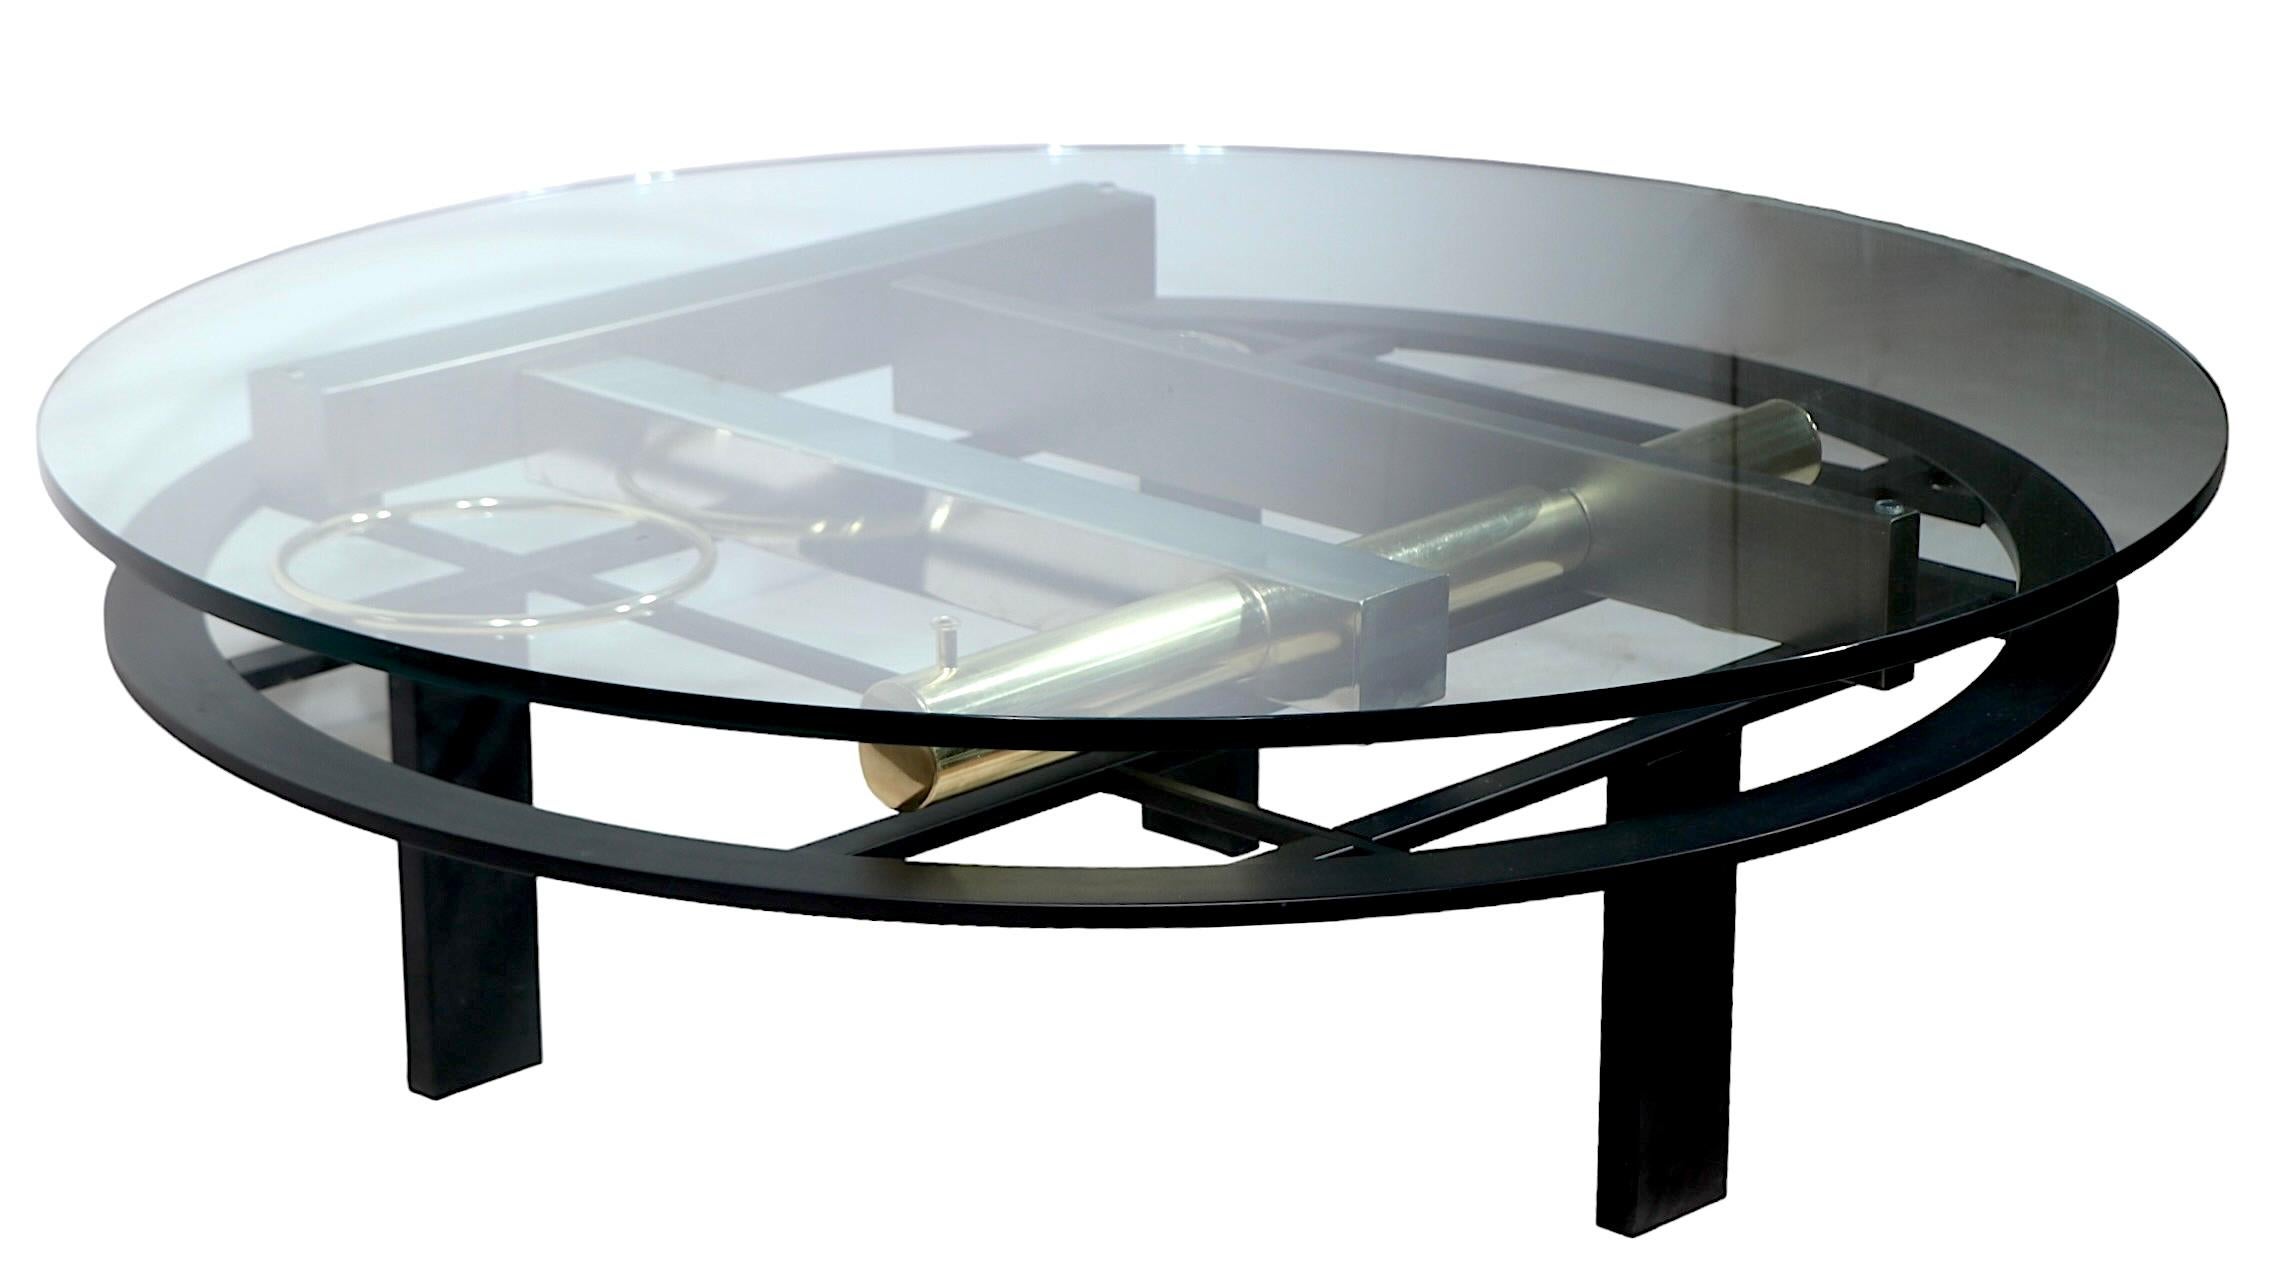 Late 20th Century Post Modern Coffee Table by Kaizo Oto for  Design Institute of America c 1980s For Sale